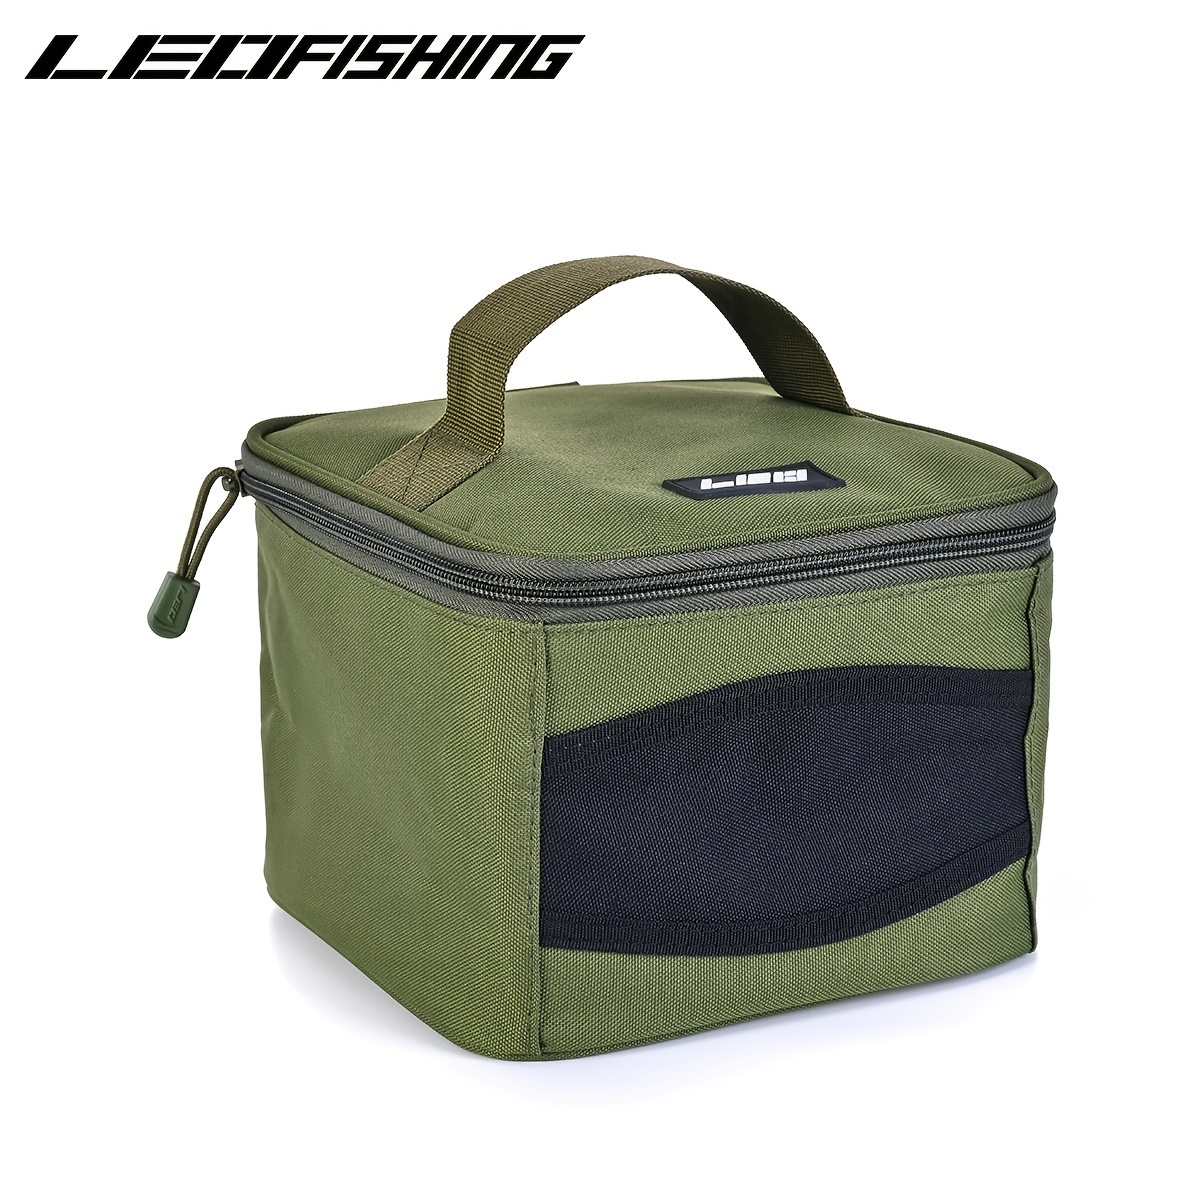 Tools Fishing Reel Case Storage Case Fishing Bag Bait Bag Protective Cover